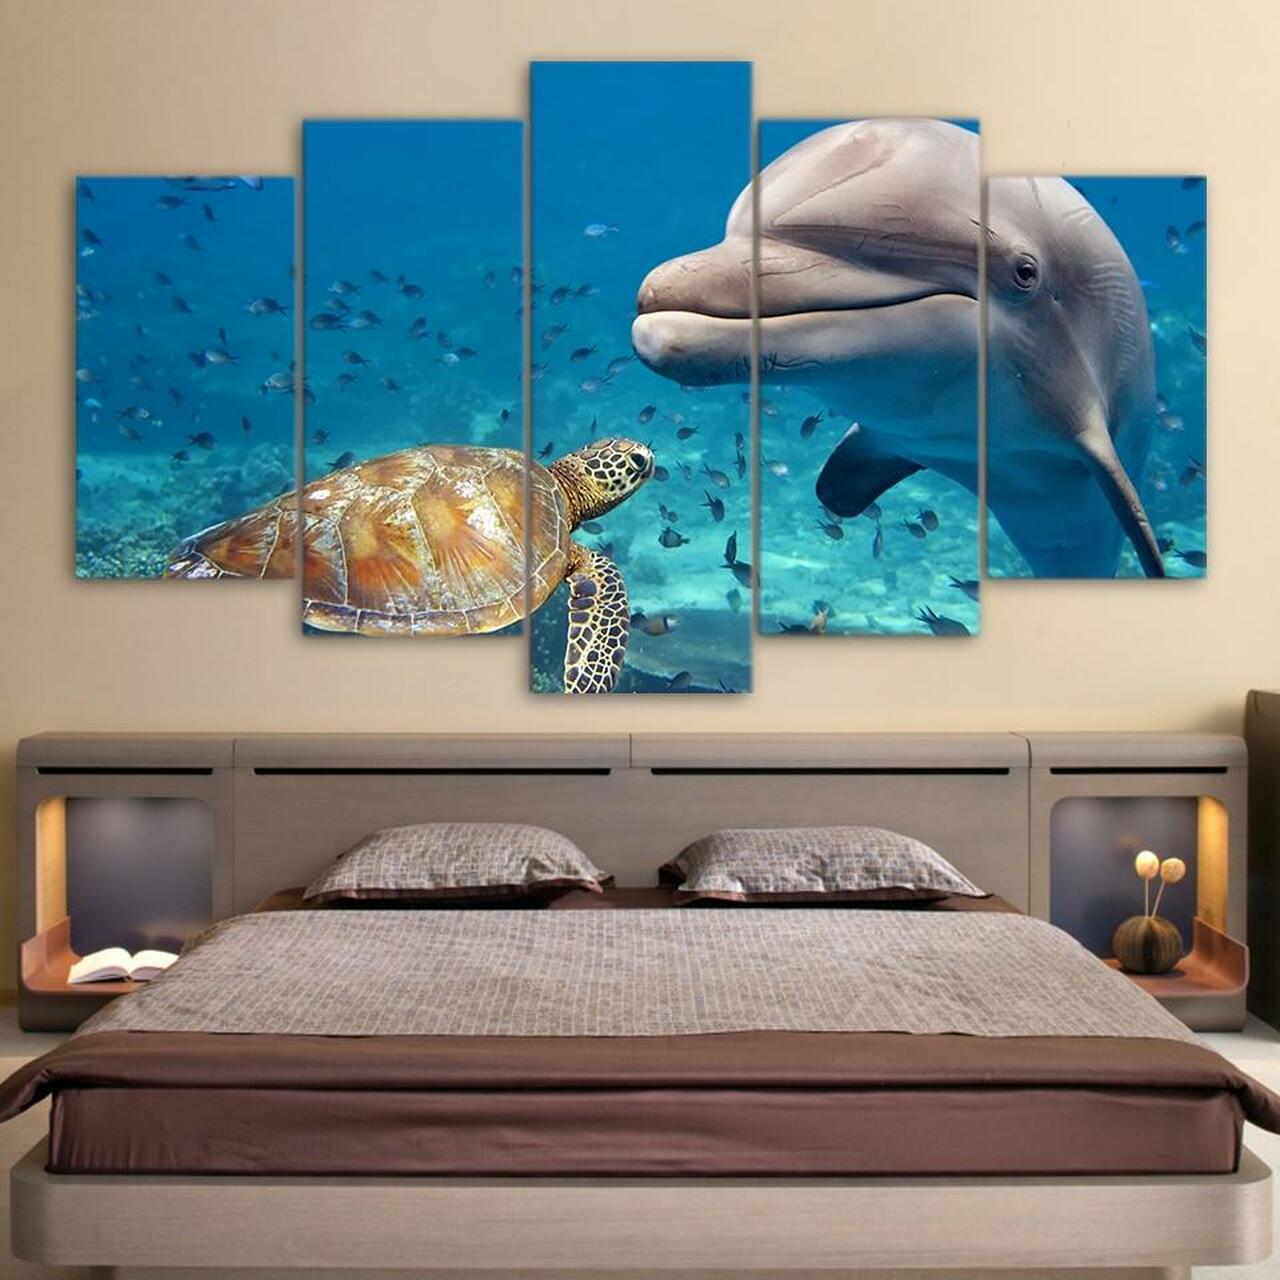 Dolphin and Sea Turtle 5 Piece Canvas Art Wall Decor